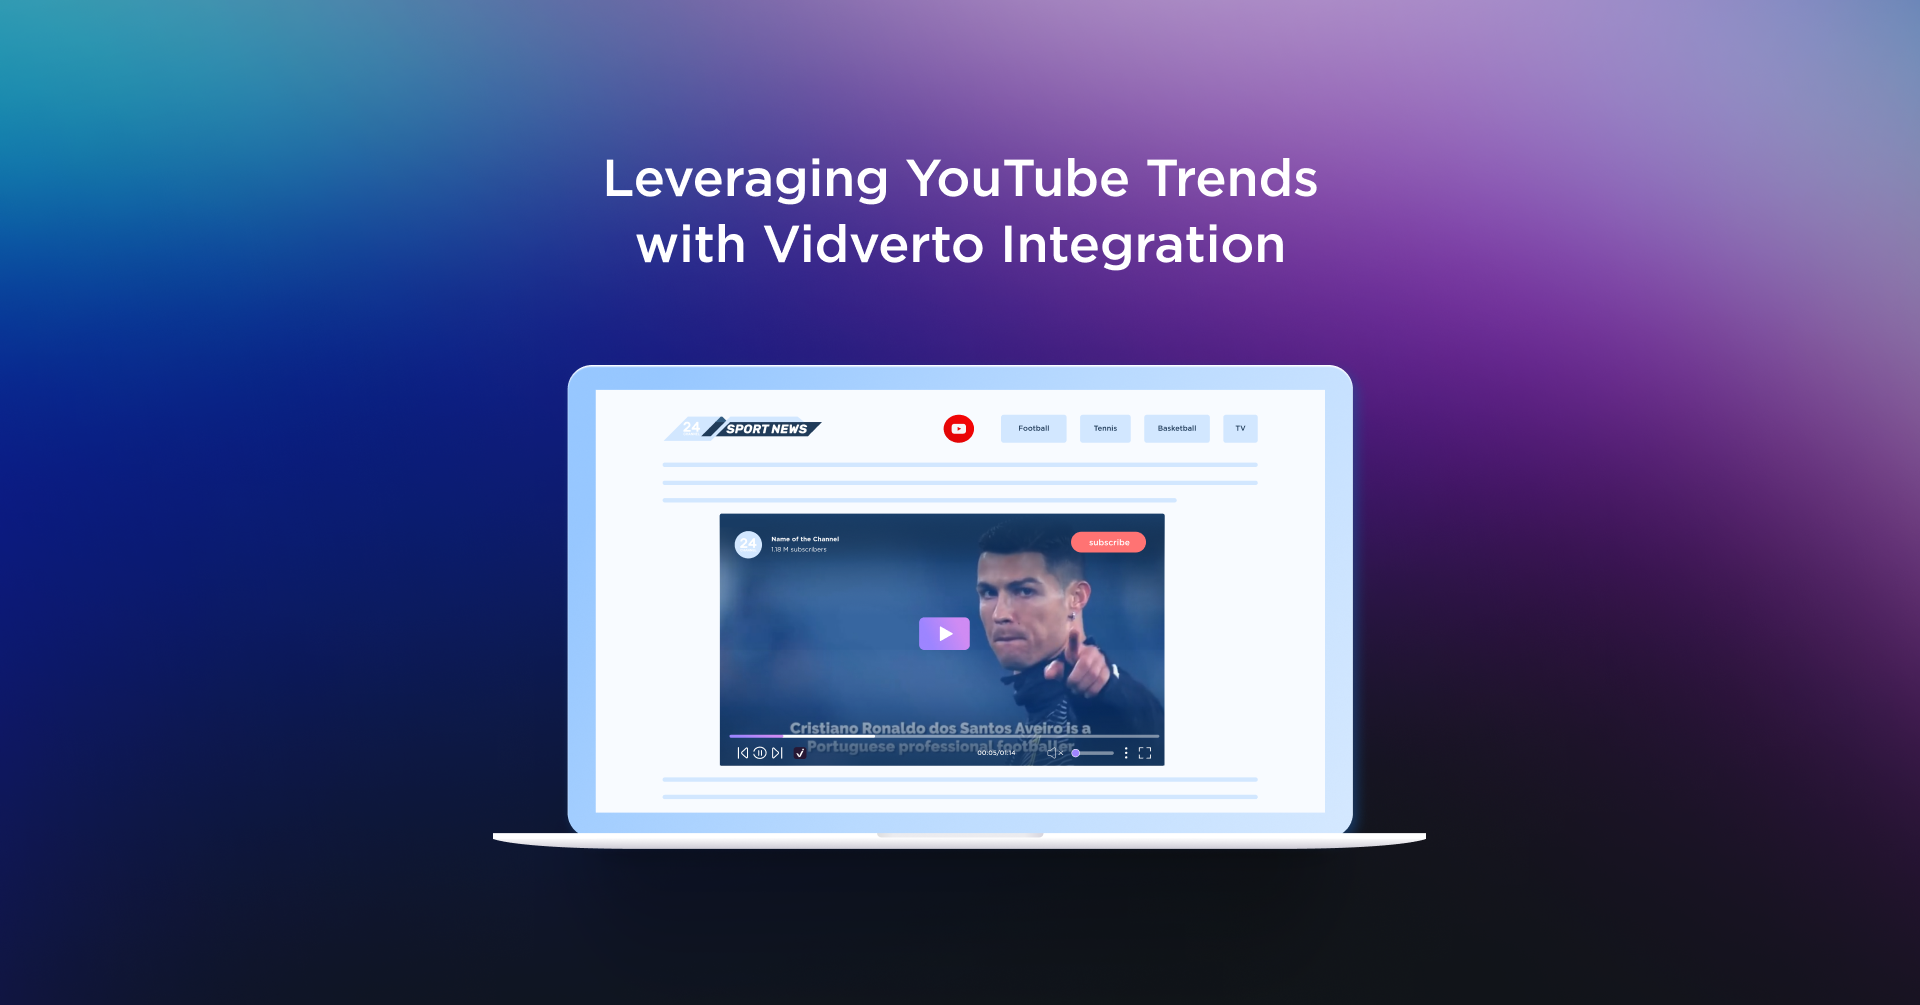 Leveraging YouTube Trends with Vidverto Integration